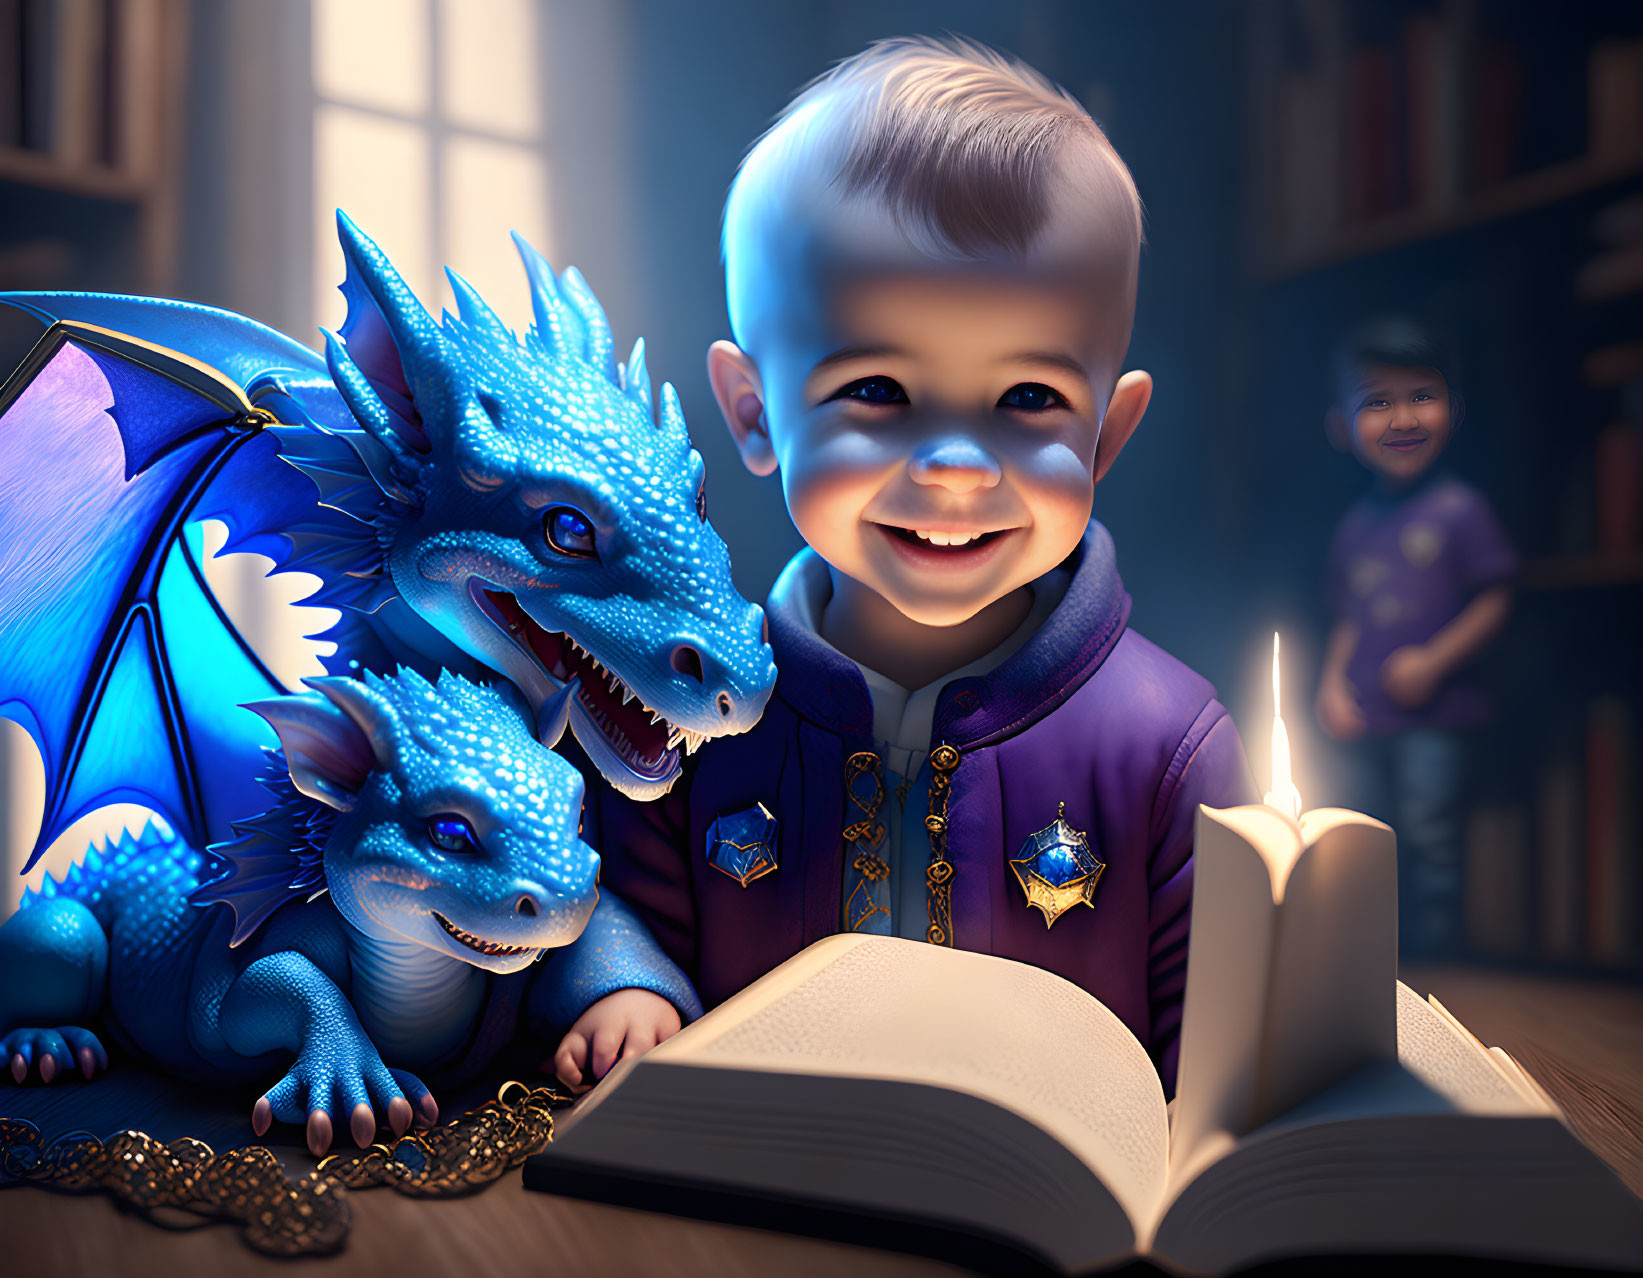 Child in wizard costume reading magical book with dragons and candlelight